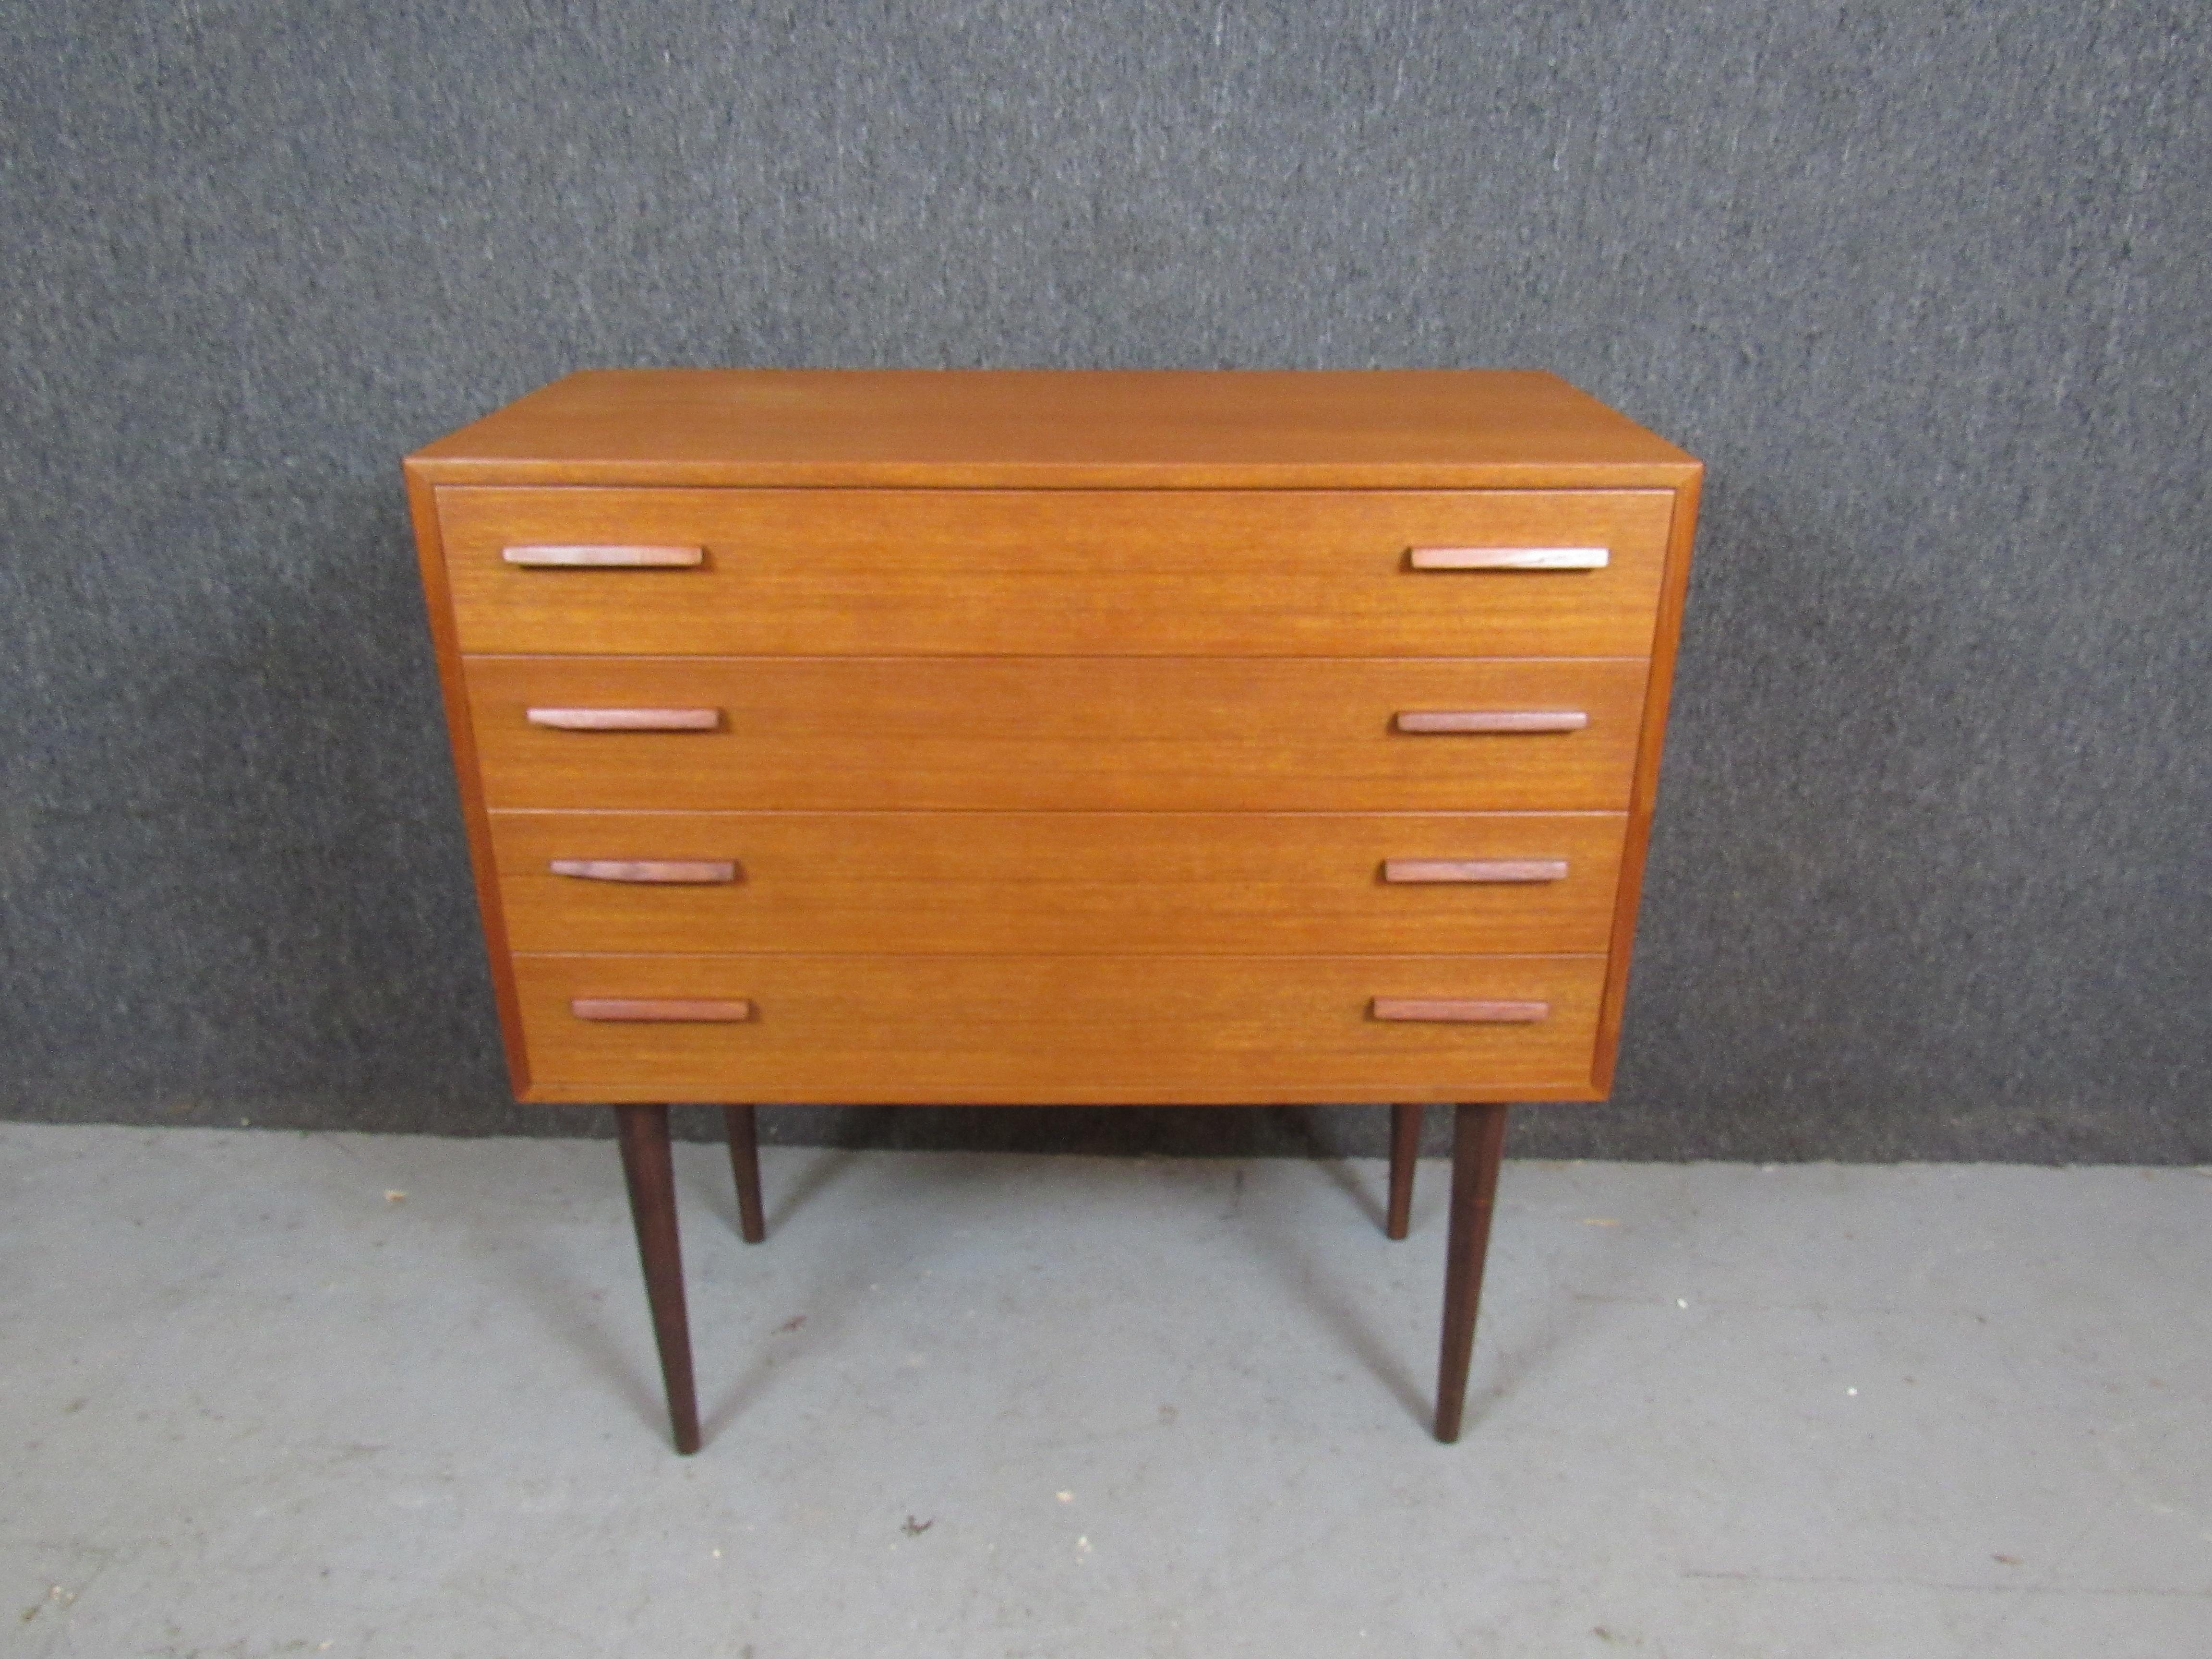 Don't miss out on your chance at a truly one-of-a-kind piece from one of the most respected names in mid-century Scandinavian modern design! This stunning chest of drawers designed by Kai Kristiansen himself features an extraordinary teak grain that